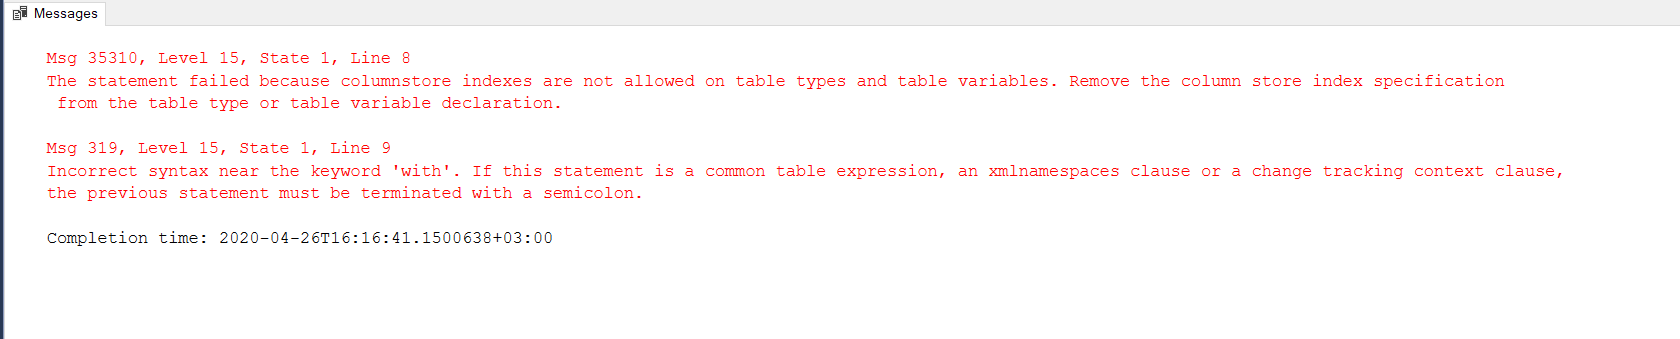 The statement failed because columnstore indexes are not allowed on table types and table variables